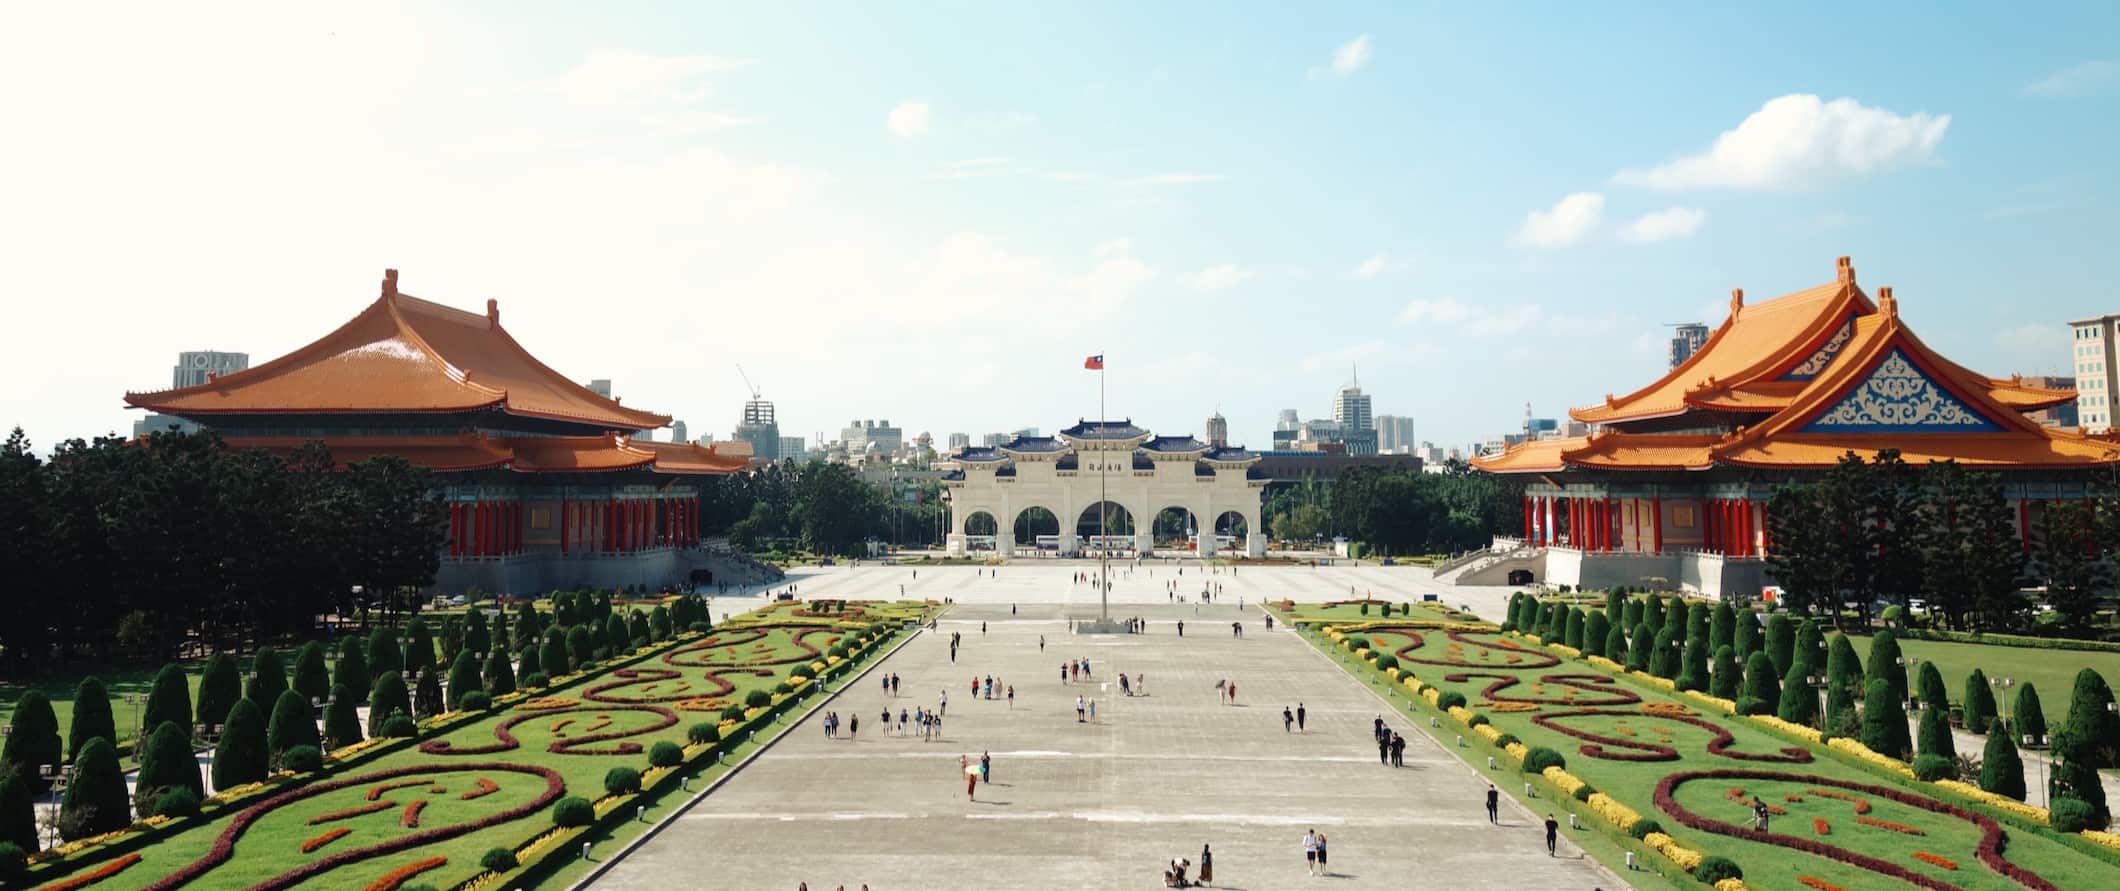 The famous and massiveChiang Kai-shek Memorial Hall in Taiwan